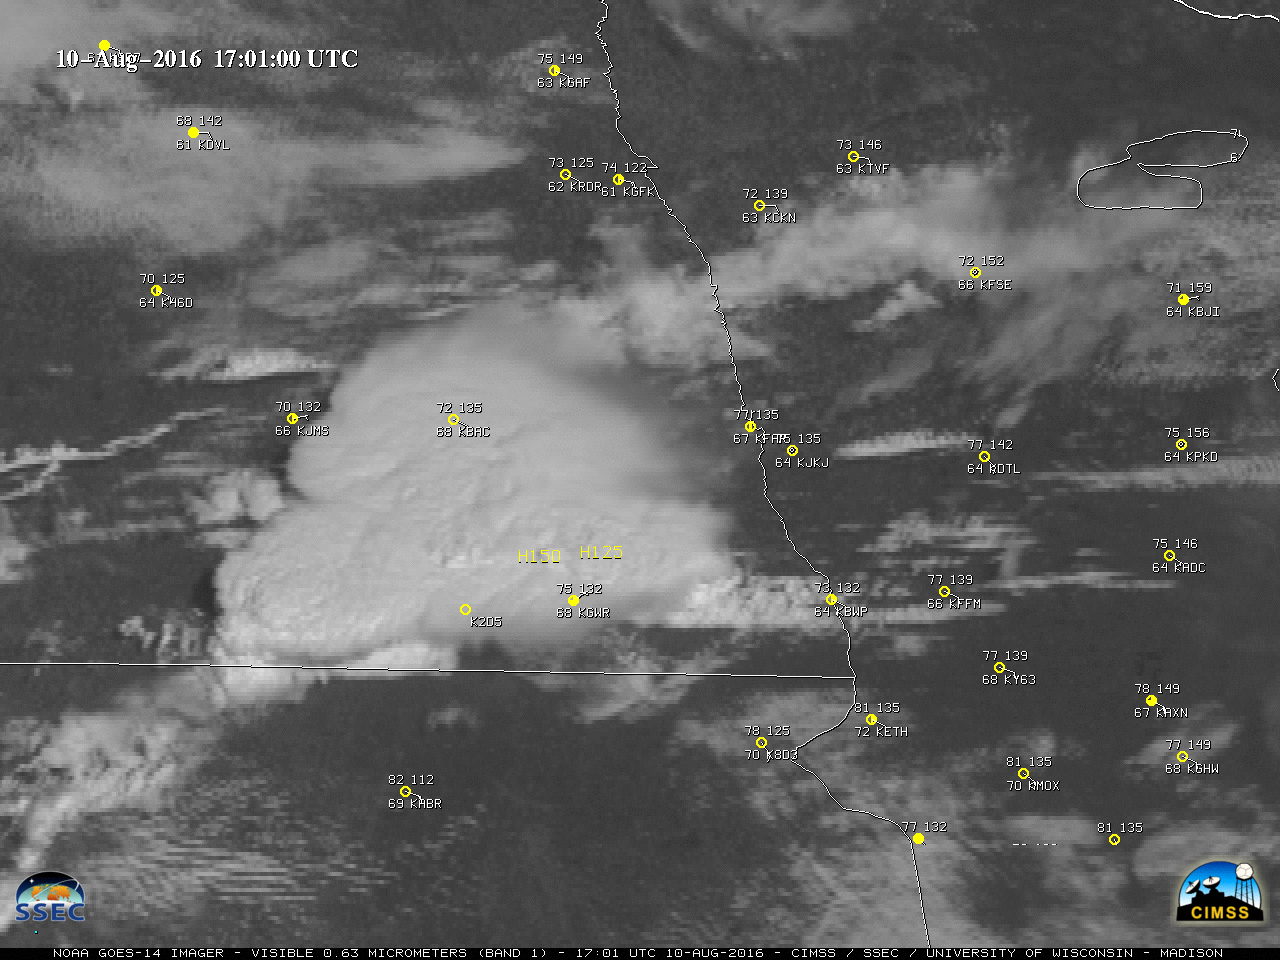 GOES-14 Visible (0.63 µm) images, with hourly surface reports and SPC storm reports of hail (yellow) and damaging winds (cyan) [click to play MP4 animation]